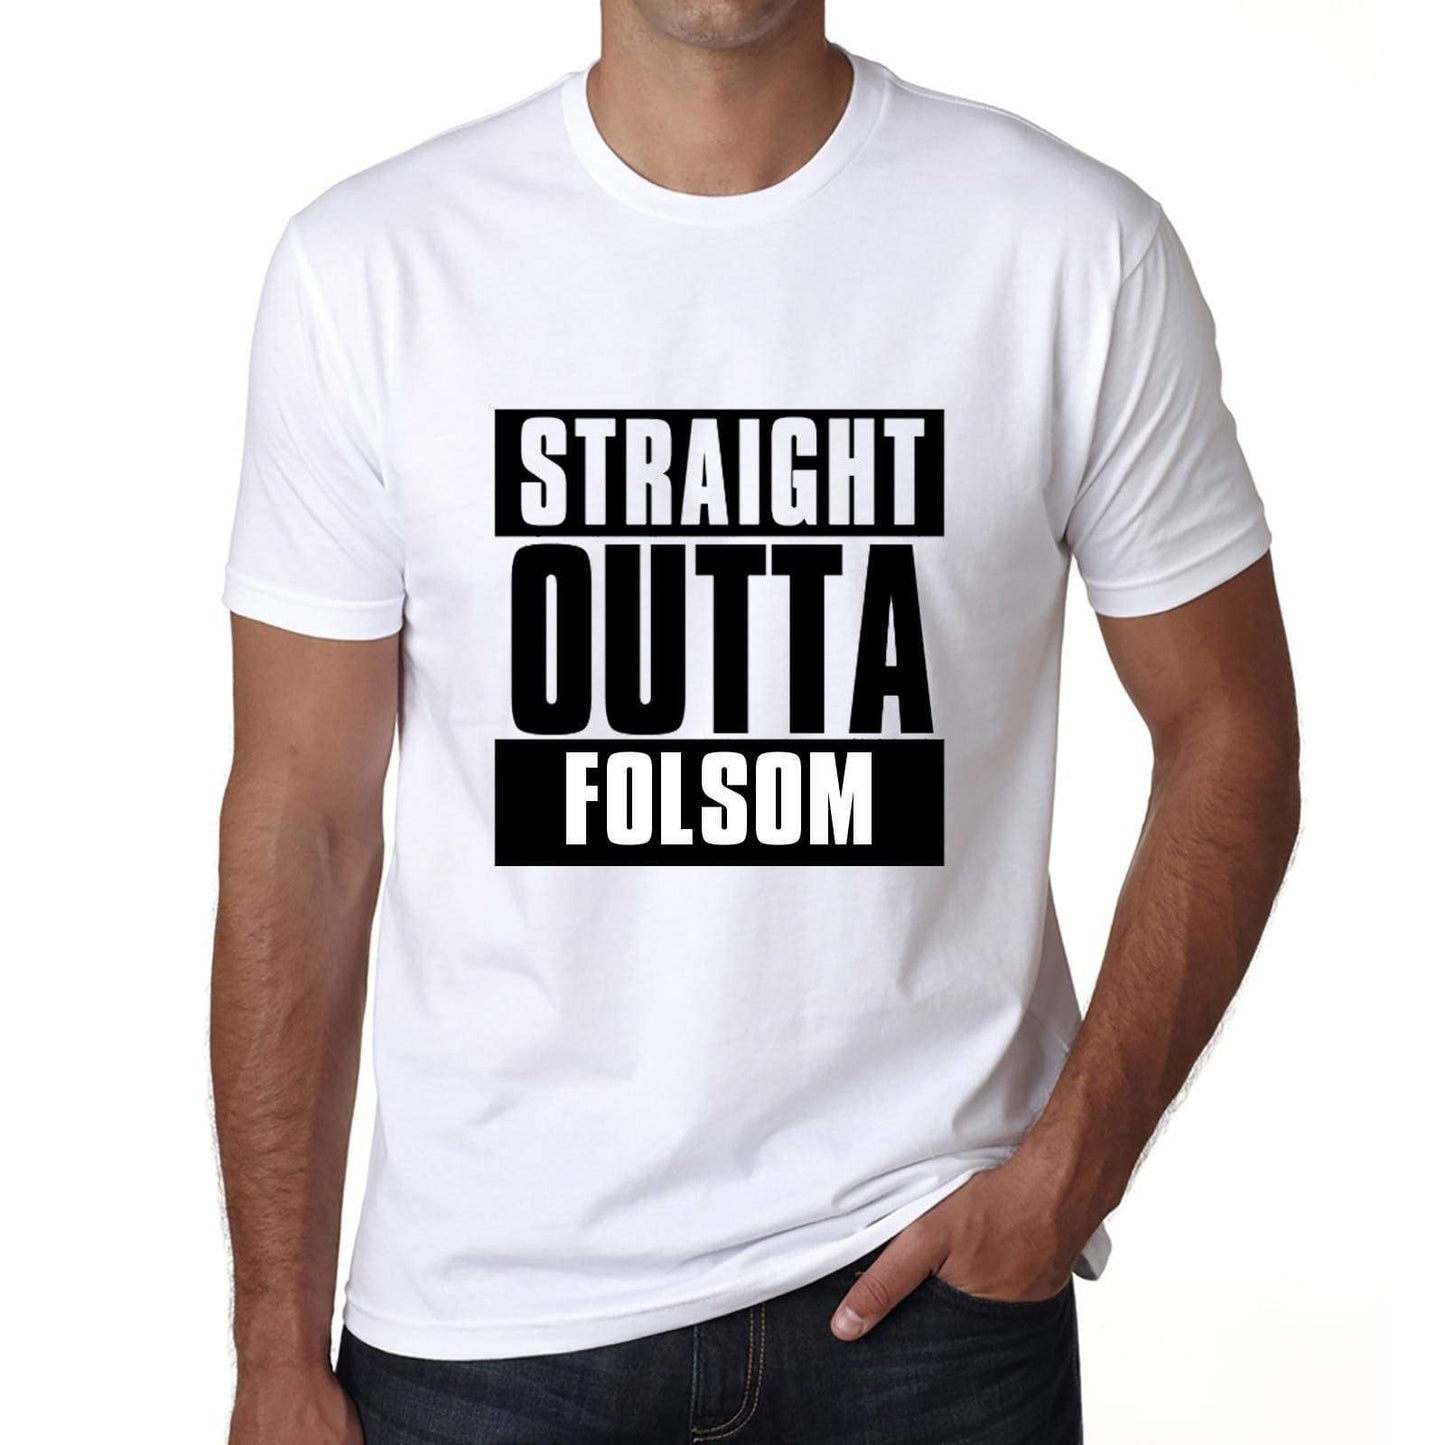 Straight Outta Folsom Mens Short Sleeve Round Neck T-Shirt 00027 - White / S - Casual